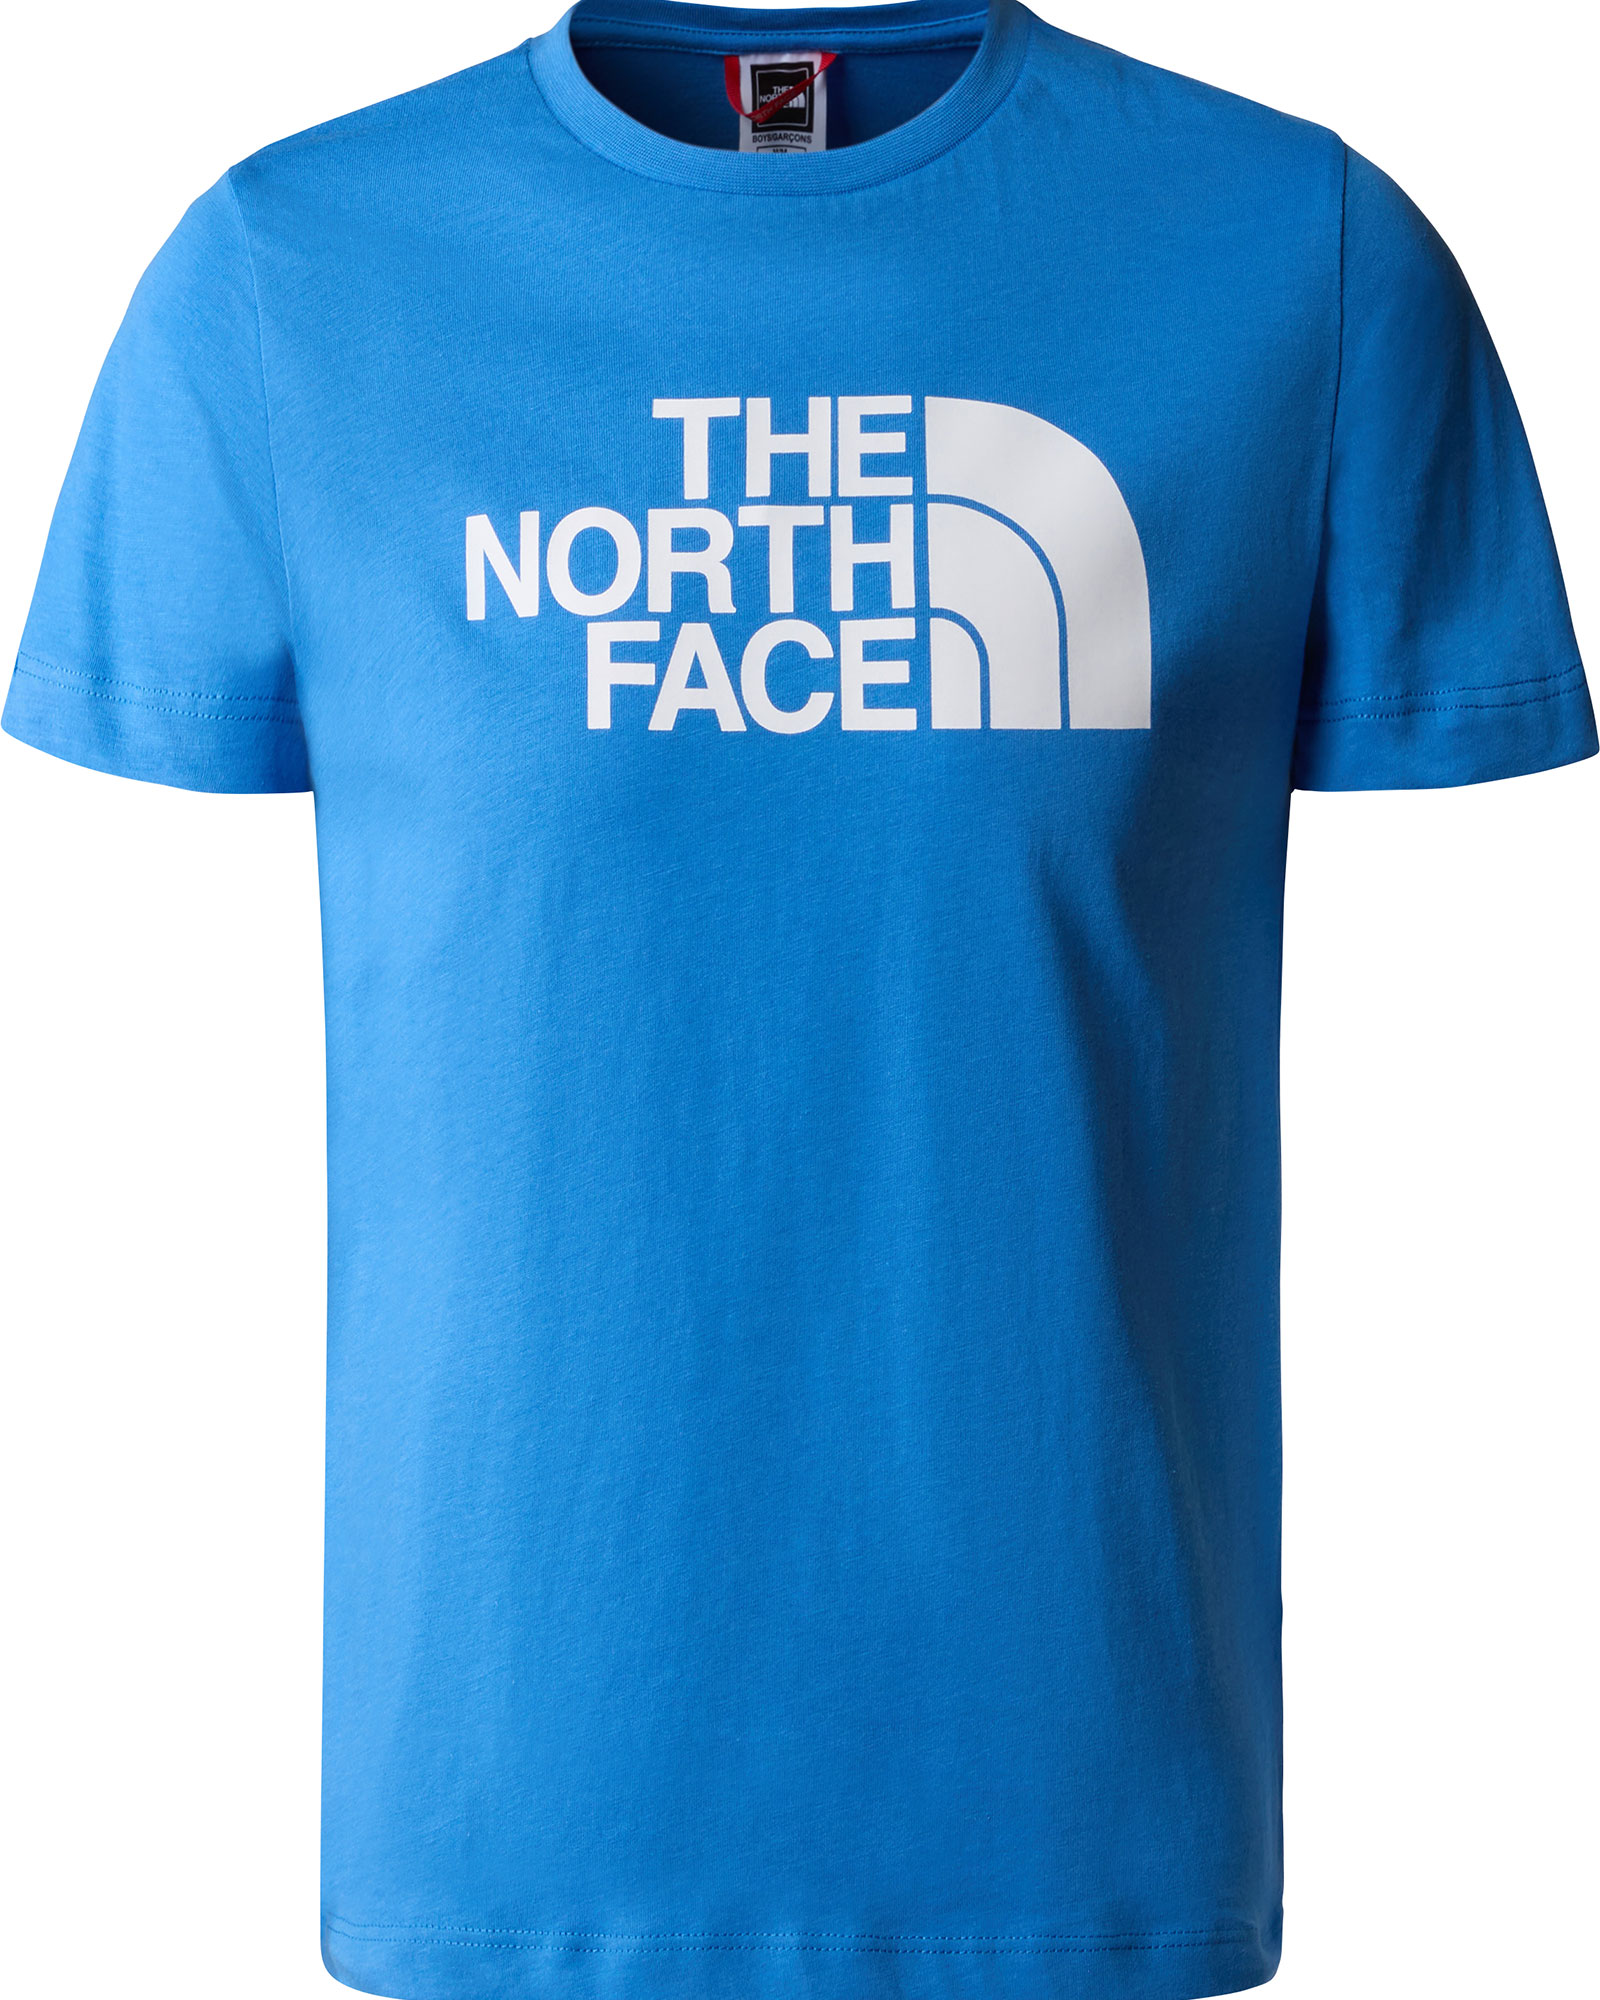 The North Face Boy’s Easy T Shirt - Super Sonic Blue M